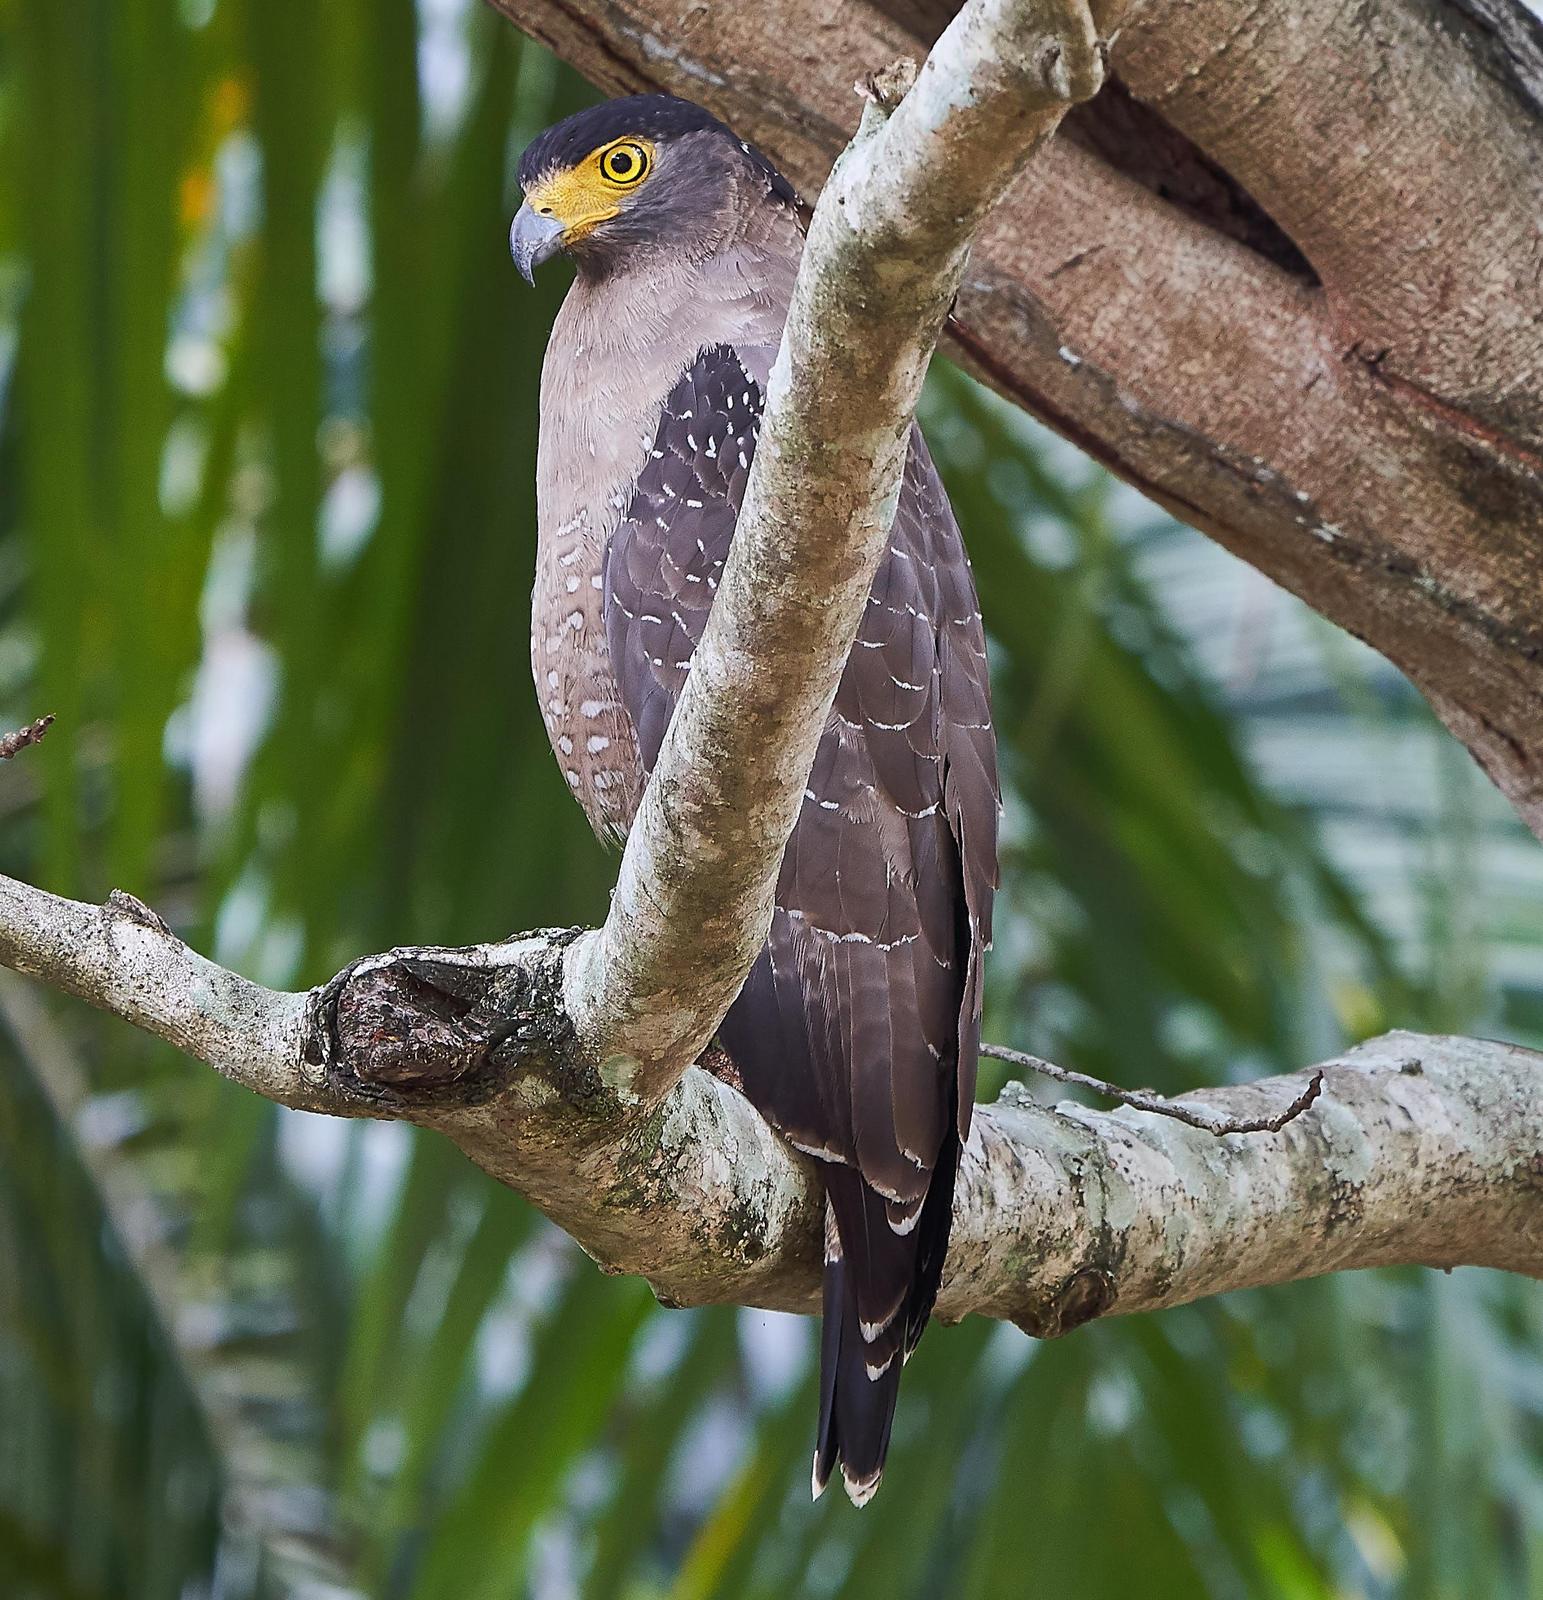 Crested Serpent-Eagle Photo by Steven Cheong